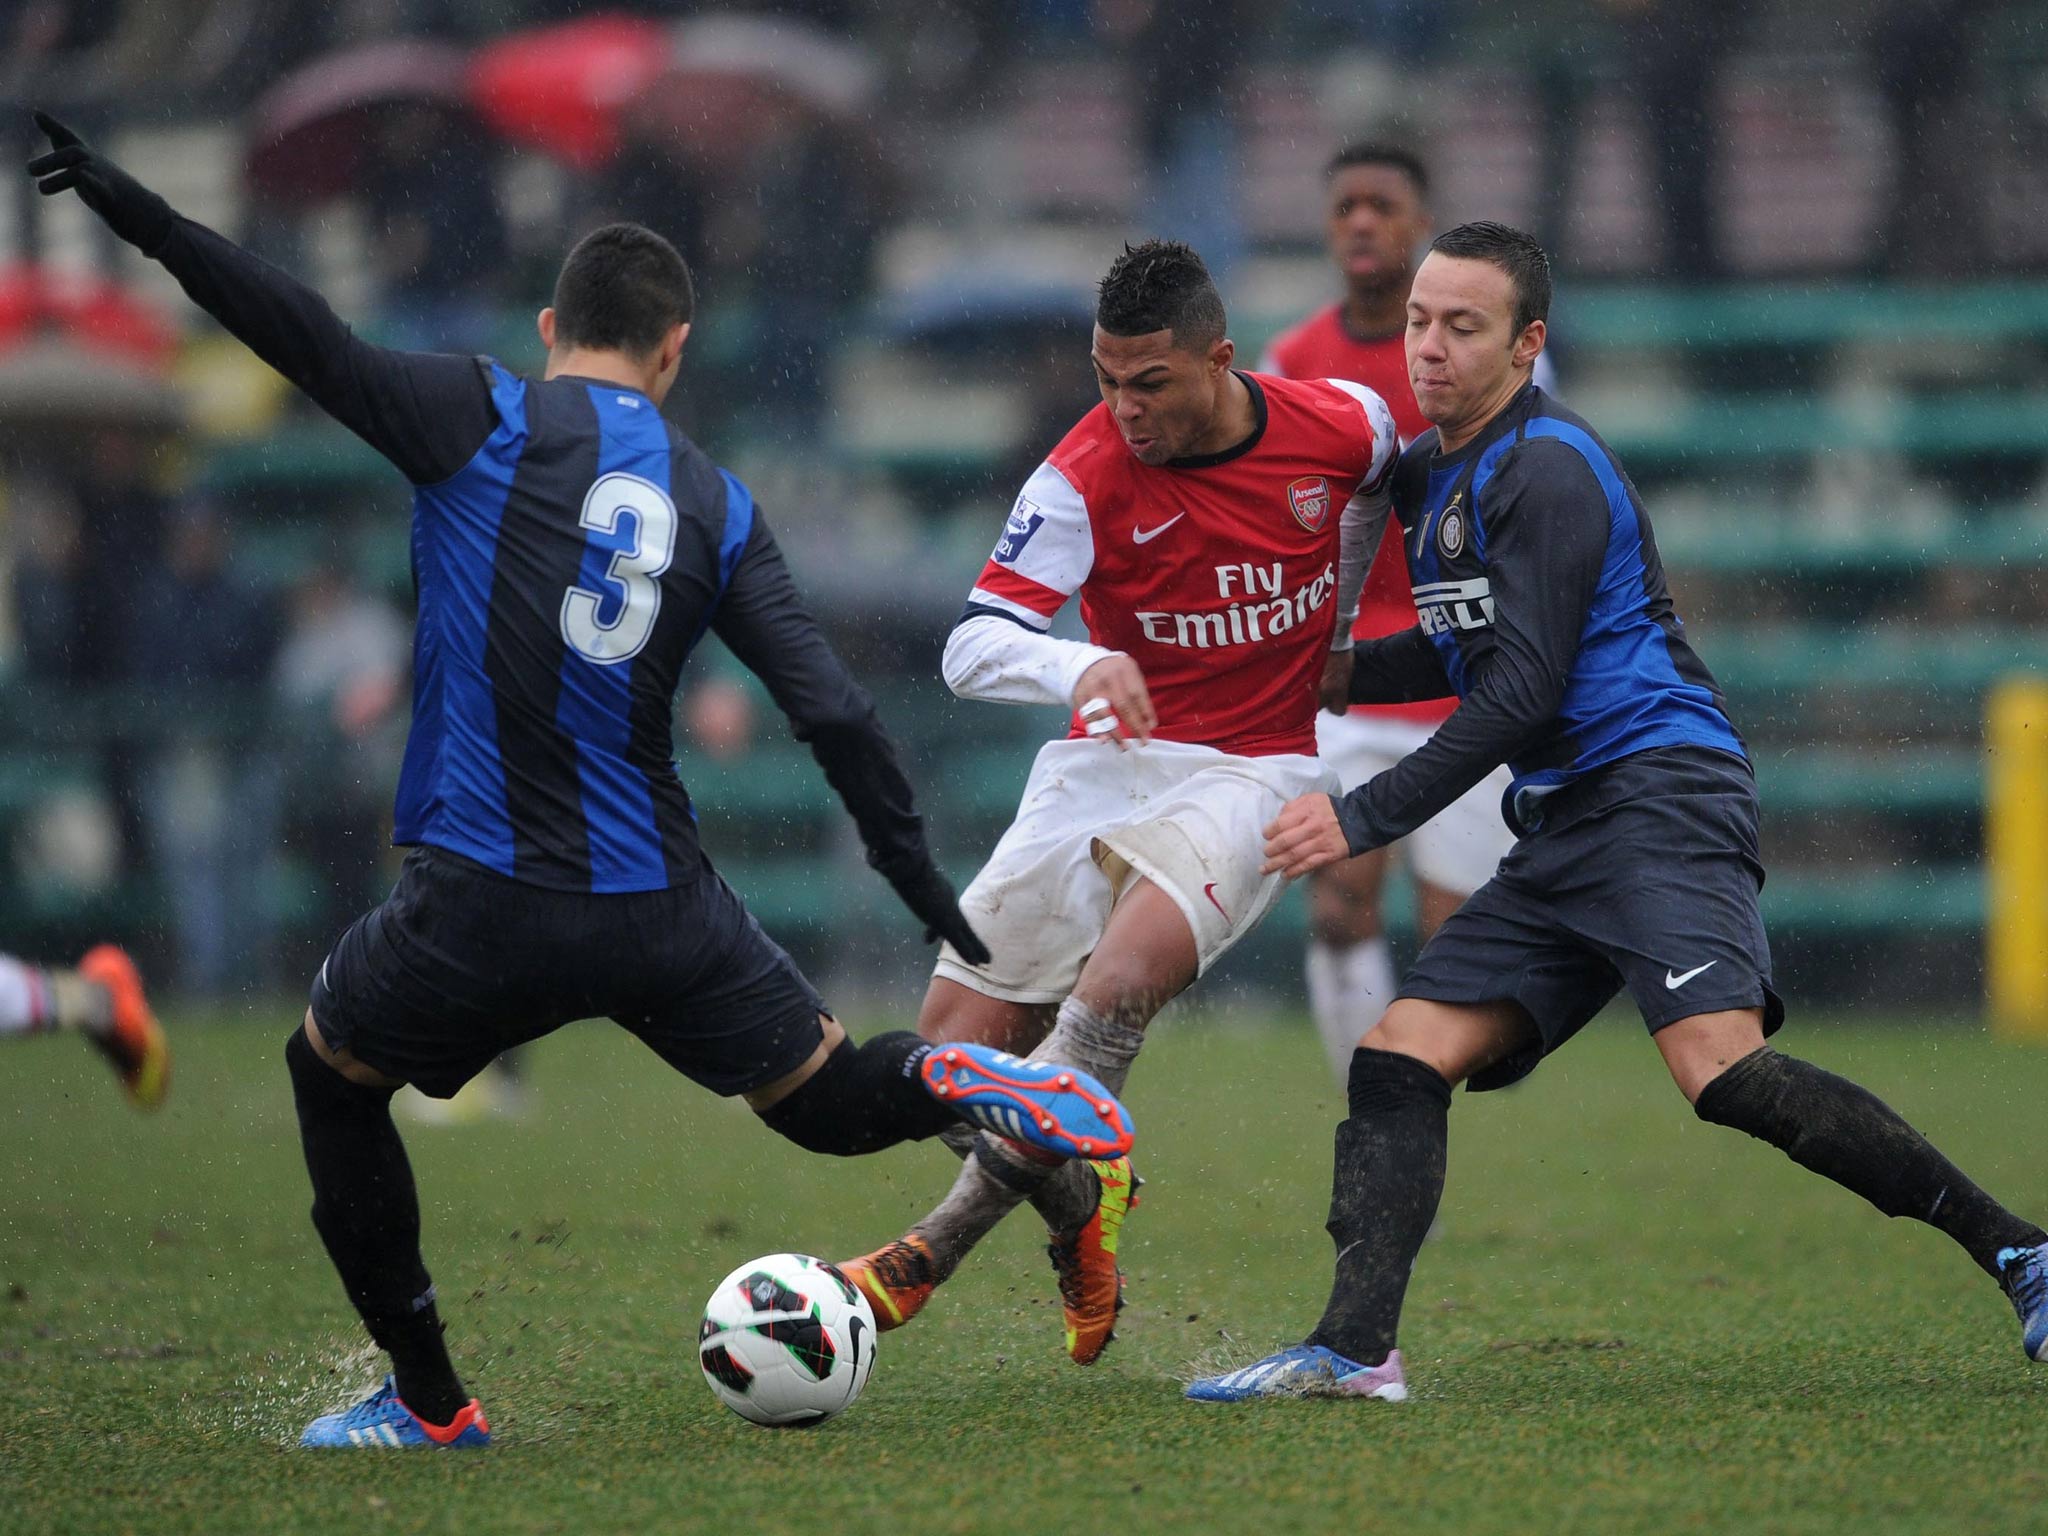 Hot prospect Serge Gnabry pictured against Inter Milan in the last 16 round